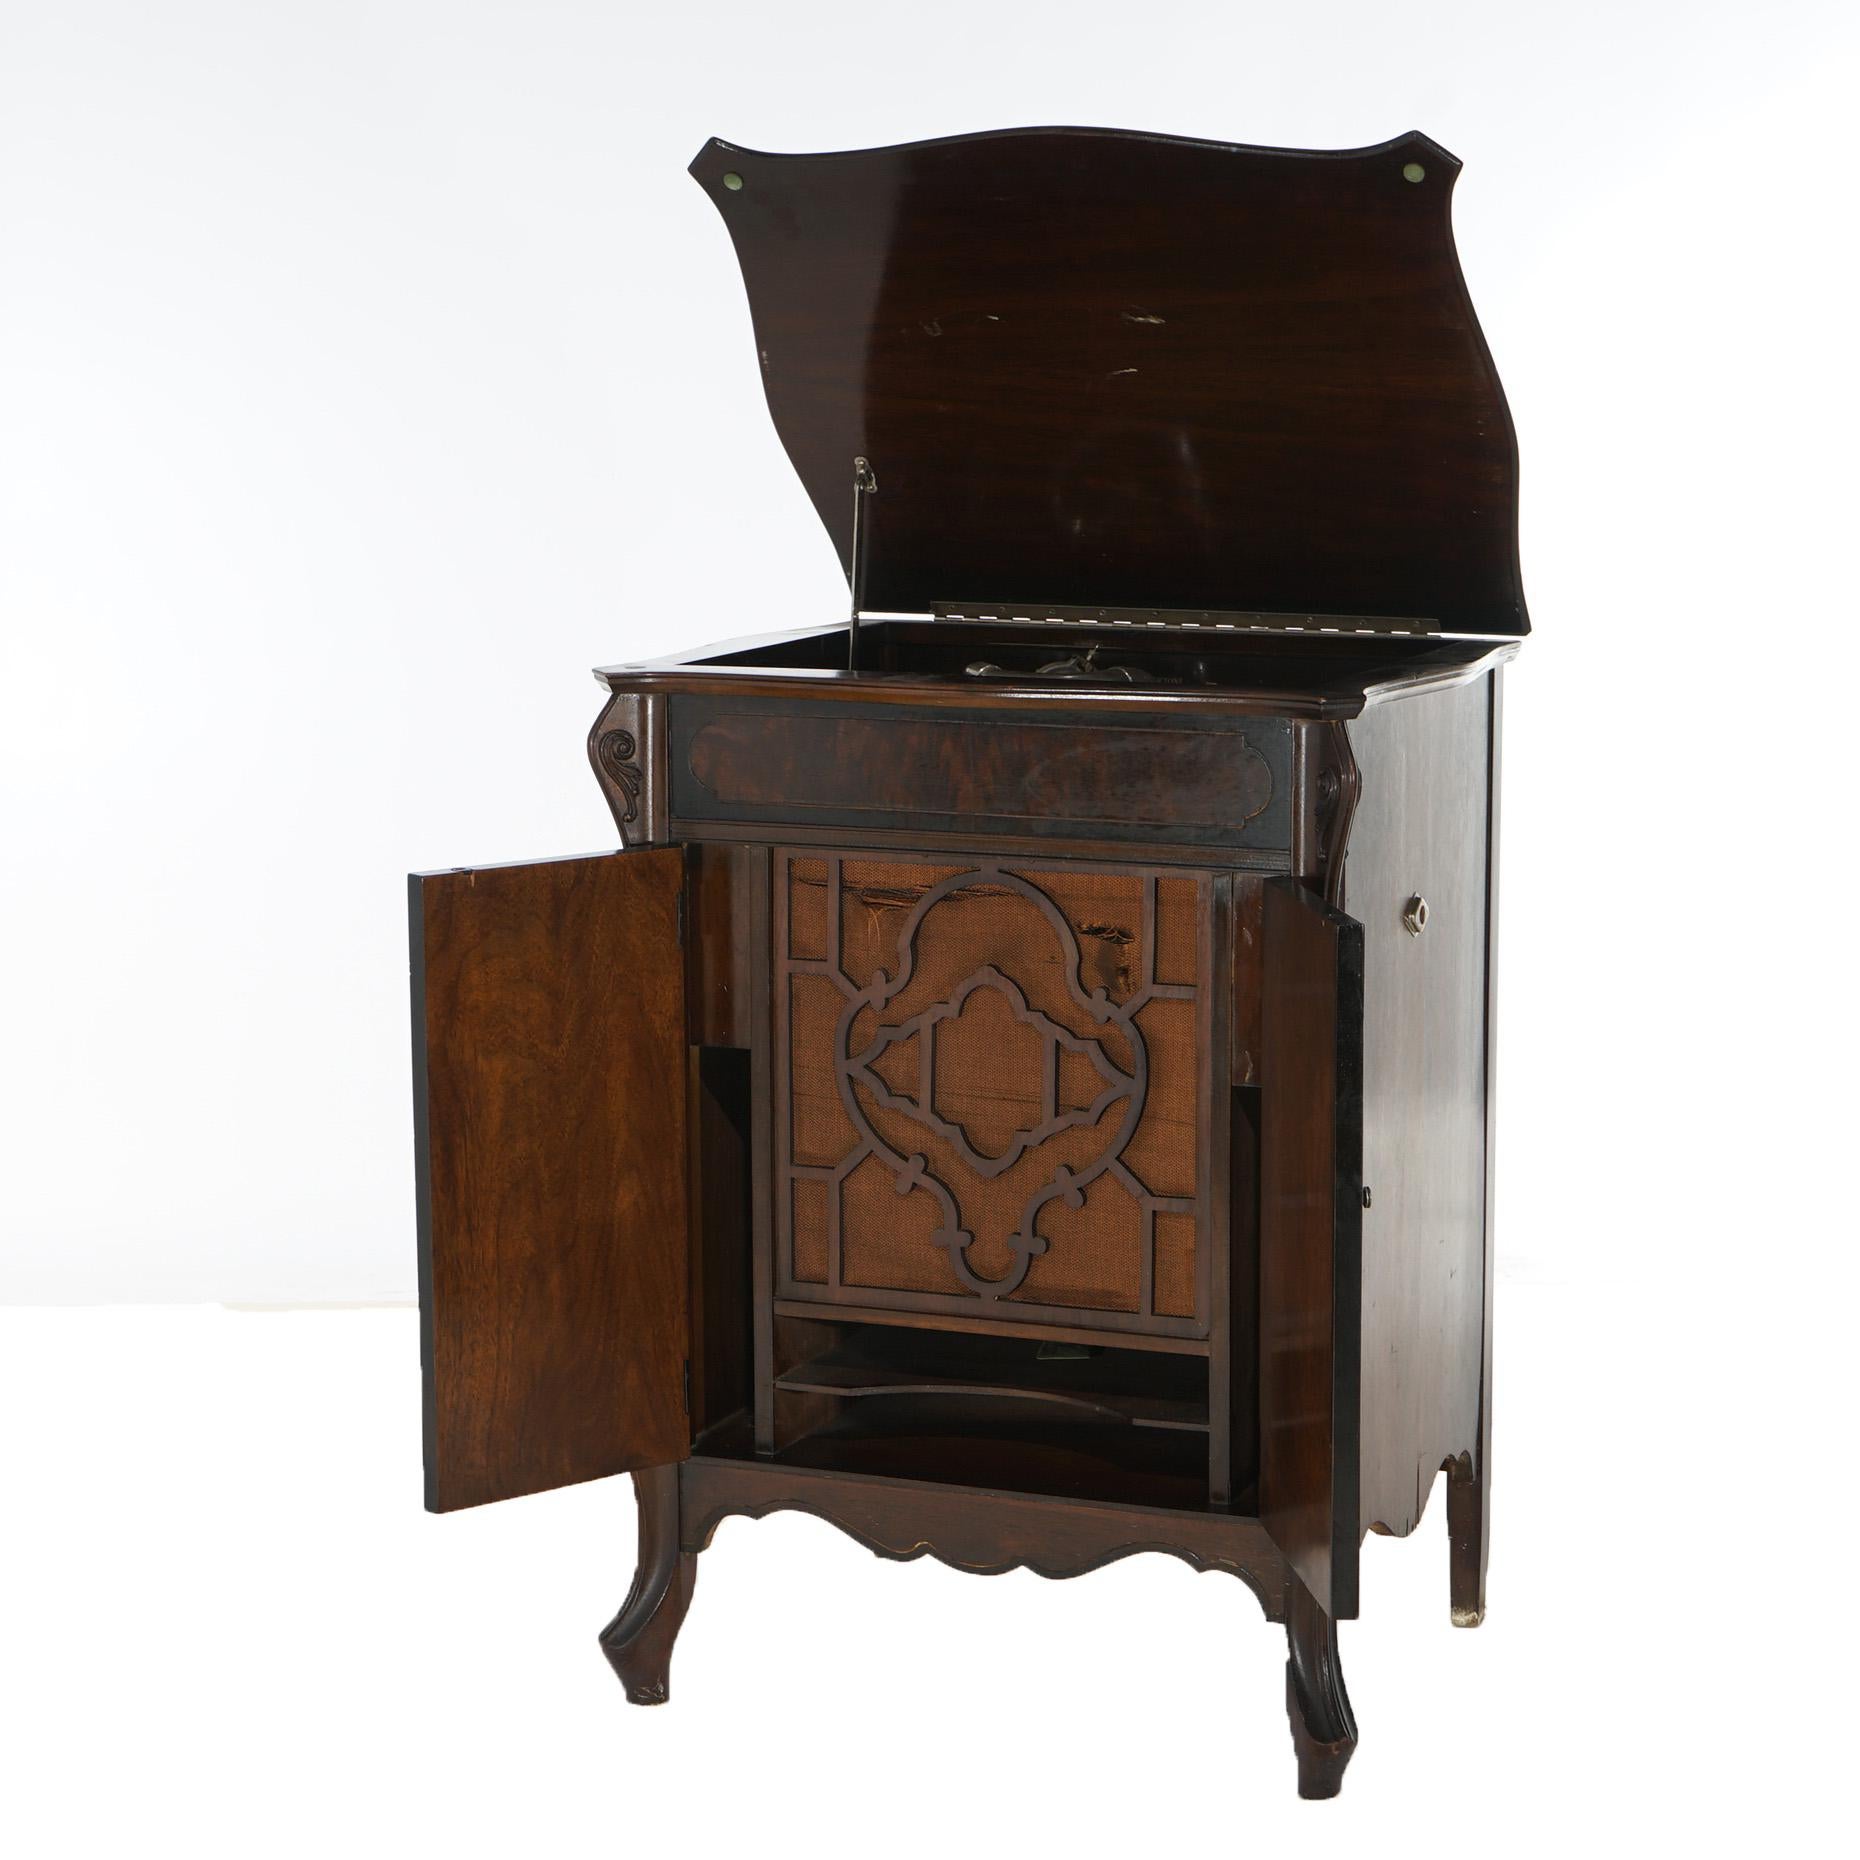 An antique Victorian Victrola phonograph by Silvertone offers Tru-Phonic floor model with mahogany case having flame mahogany accents and raised on cabriole legs, maker label as photographed, c1930

Measures- 35.25''H x 26.25''W x 21''D